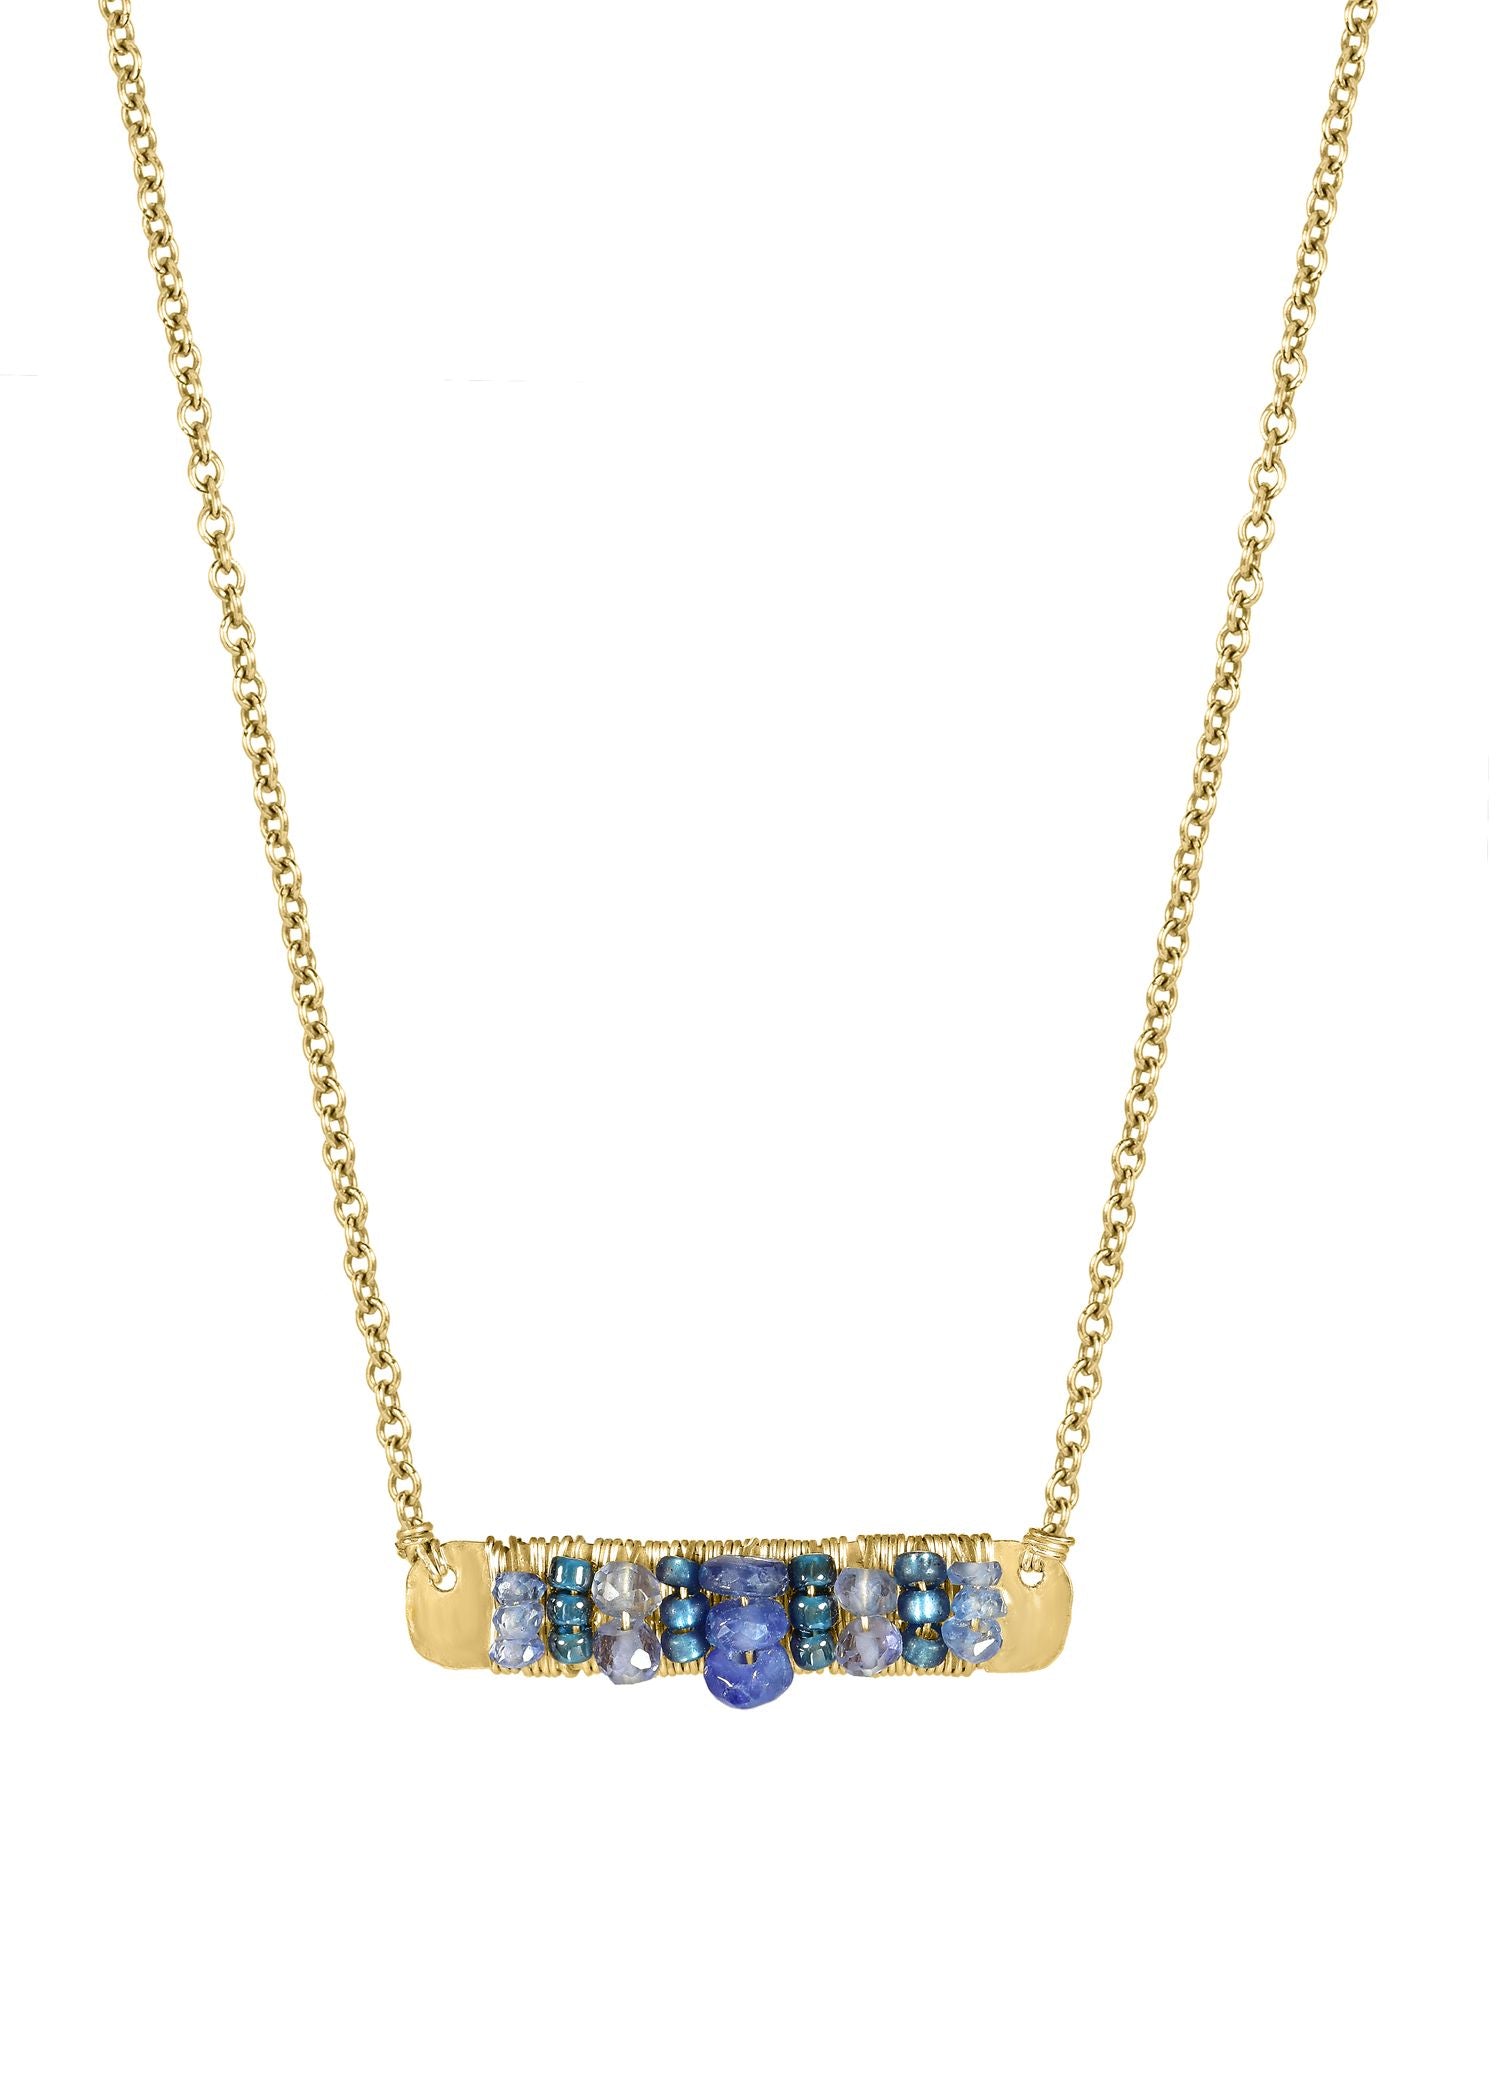 Sapphire Kyanite Tanzanite Seed beads 14k gold fill Necklace measures 16-1/2” in length Pendant measures 1/4” in length and 7/8” in width Handmade in our Los Angeles studio